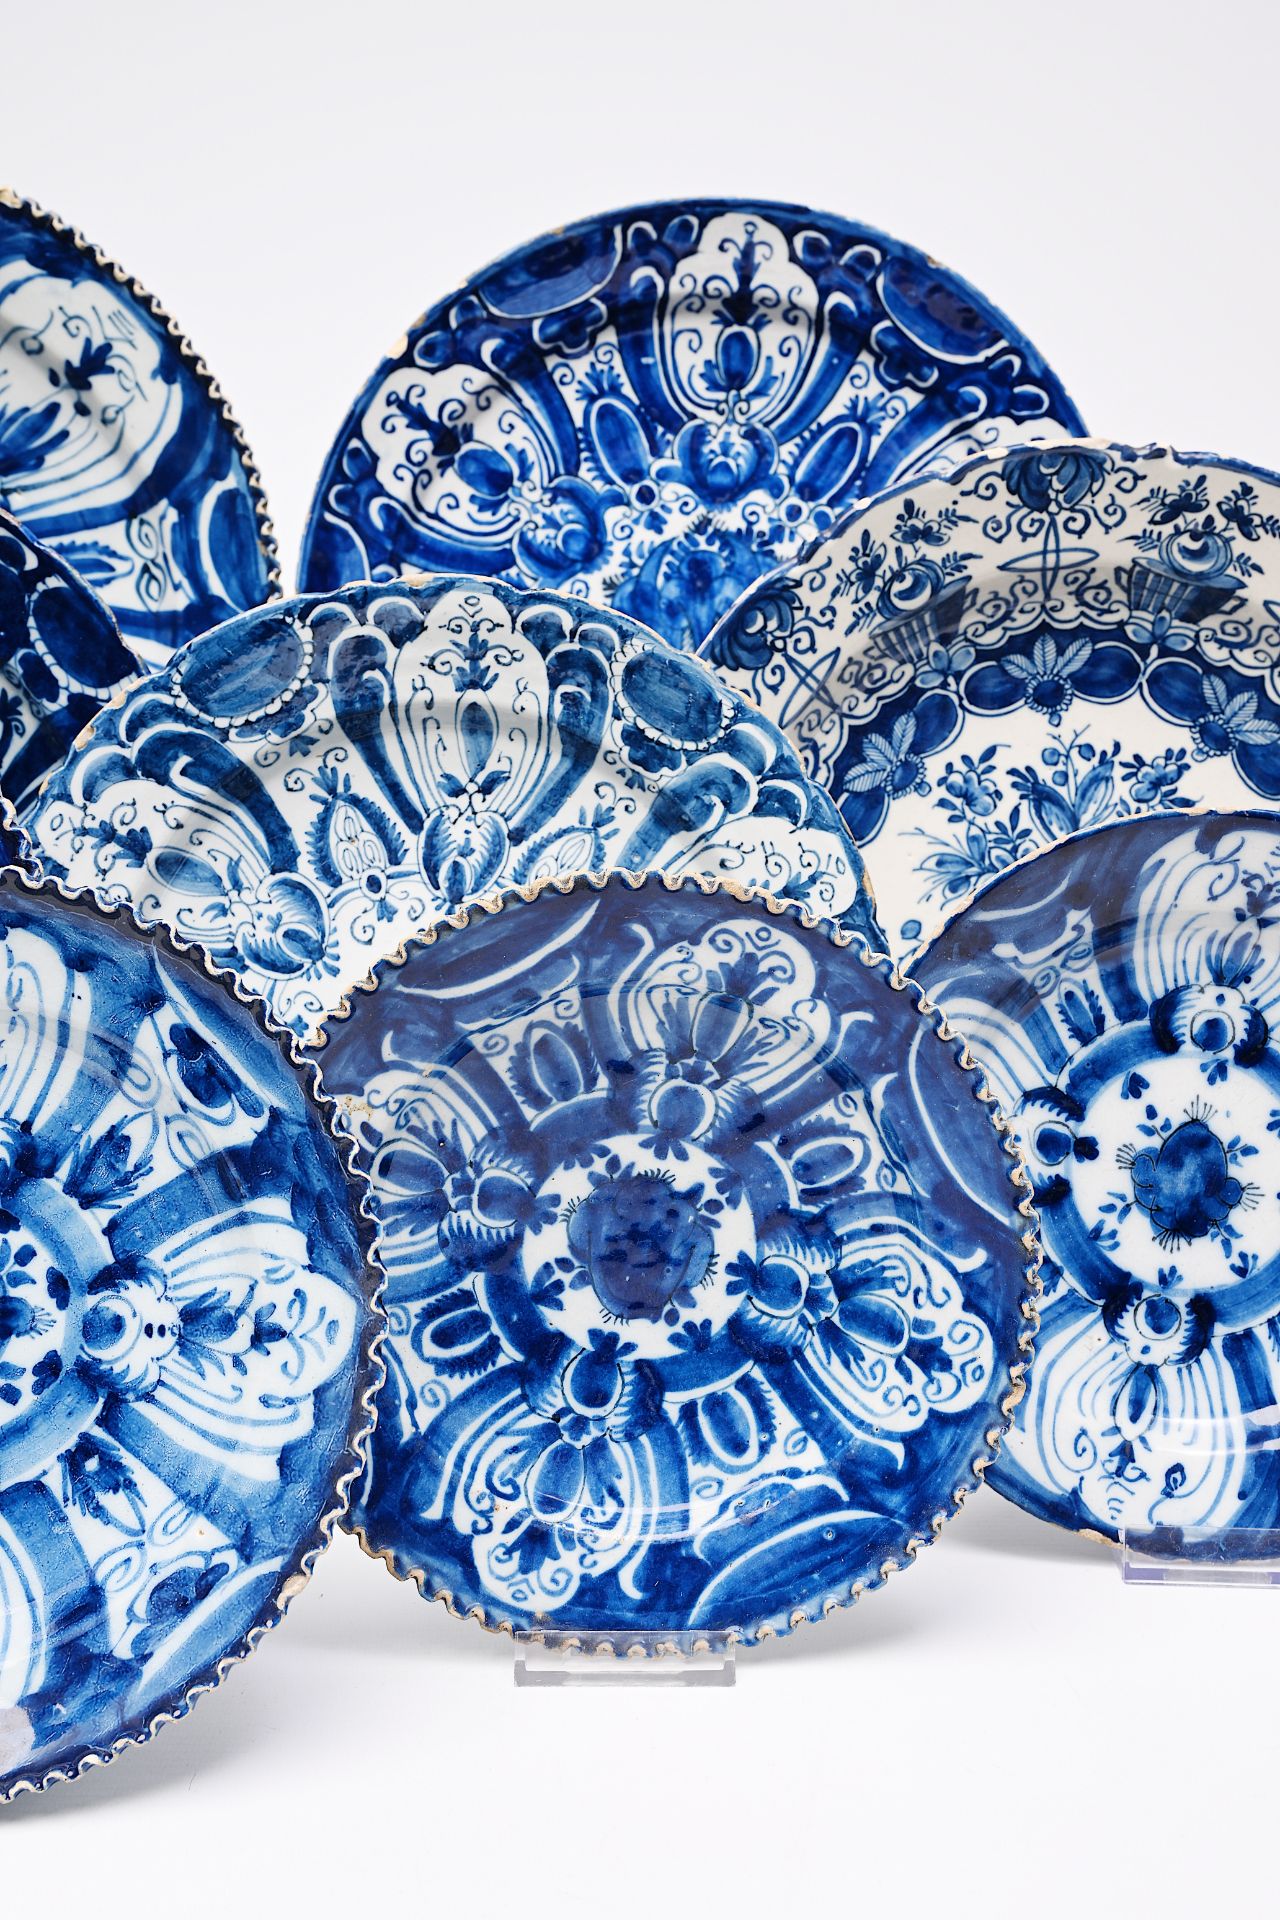 A varied collection of Dutch Delft blue and white plates and dishes with floral design, 18th C. - Bild 3 aus 8